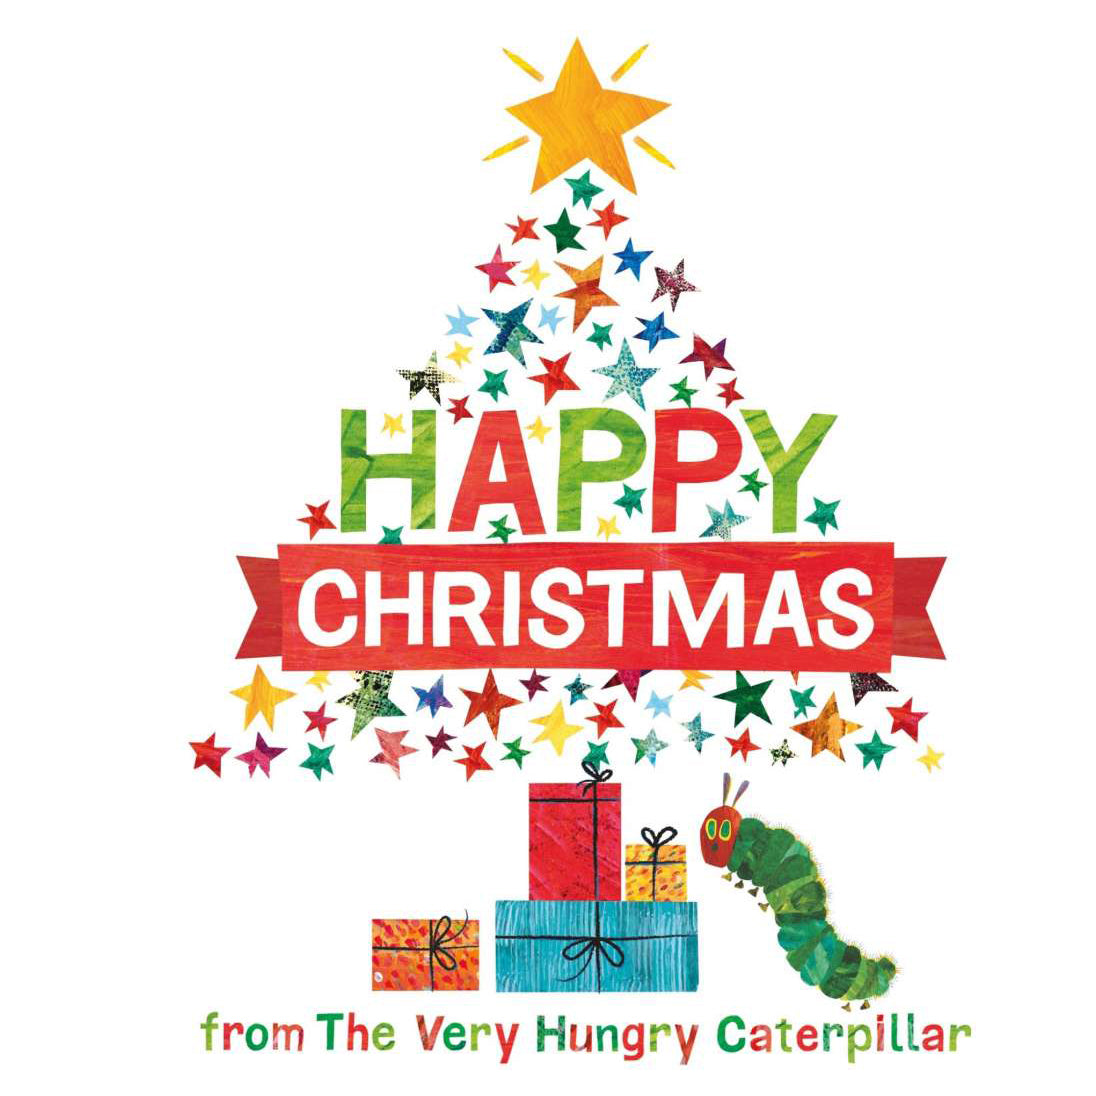 The Very Hungry Caterpillar - Happy Christmas